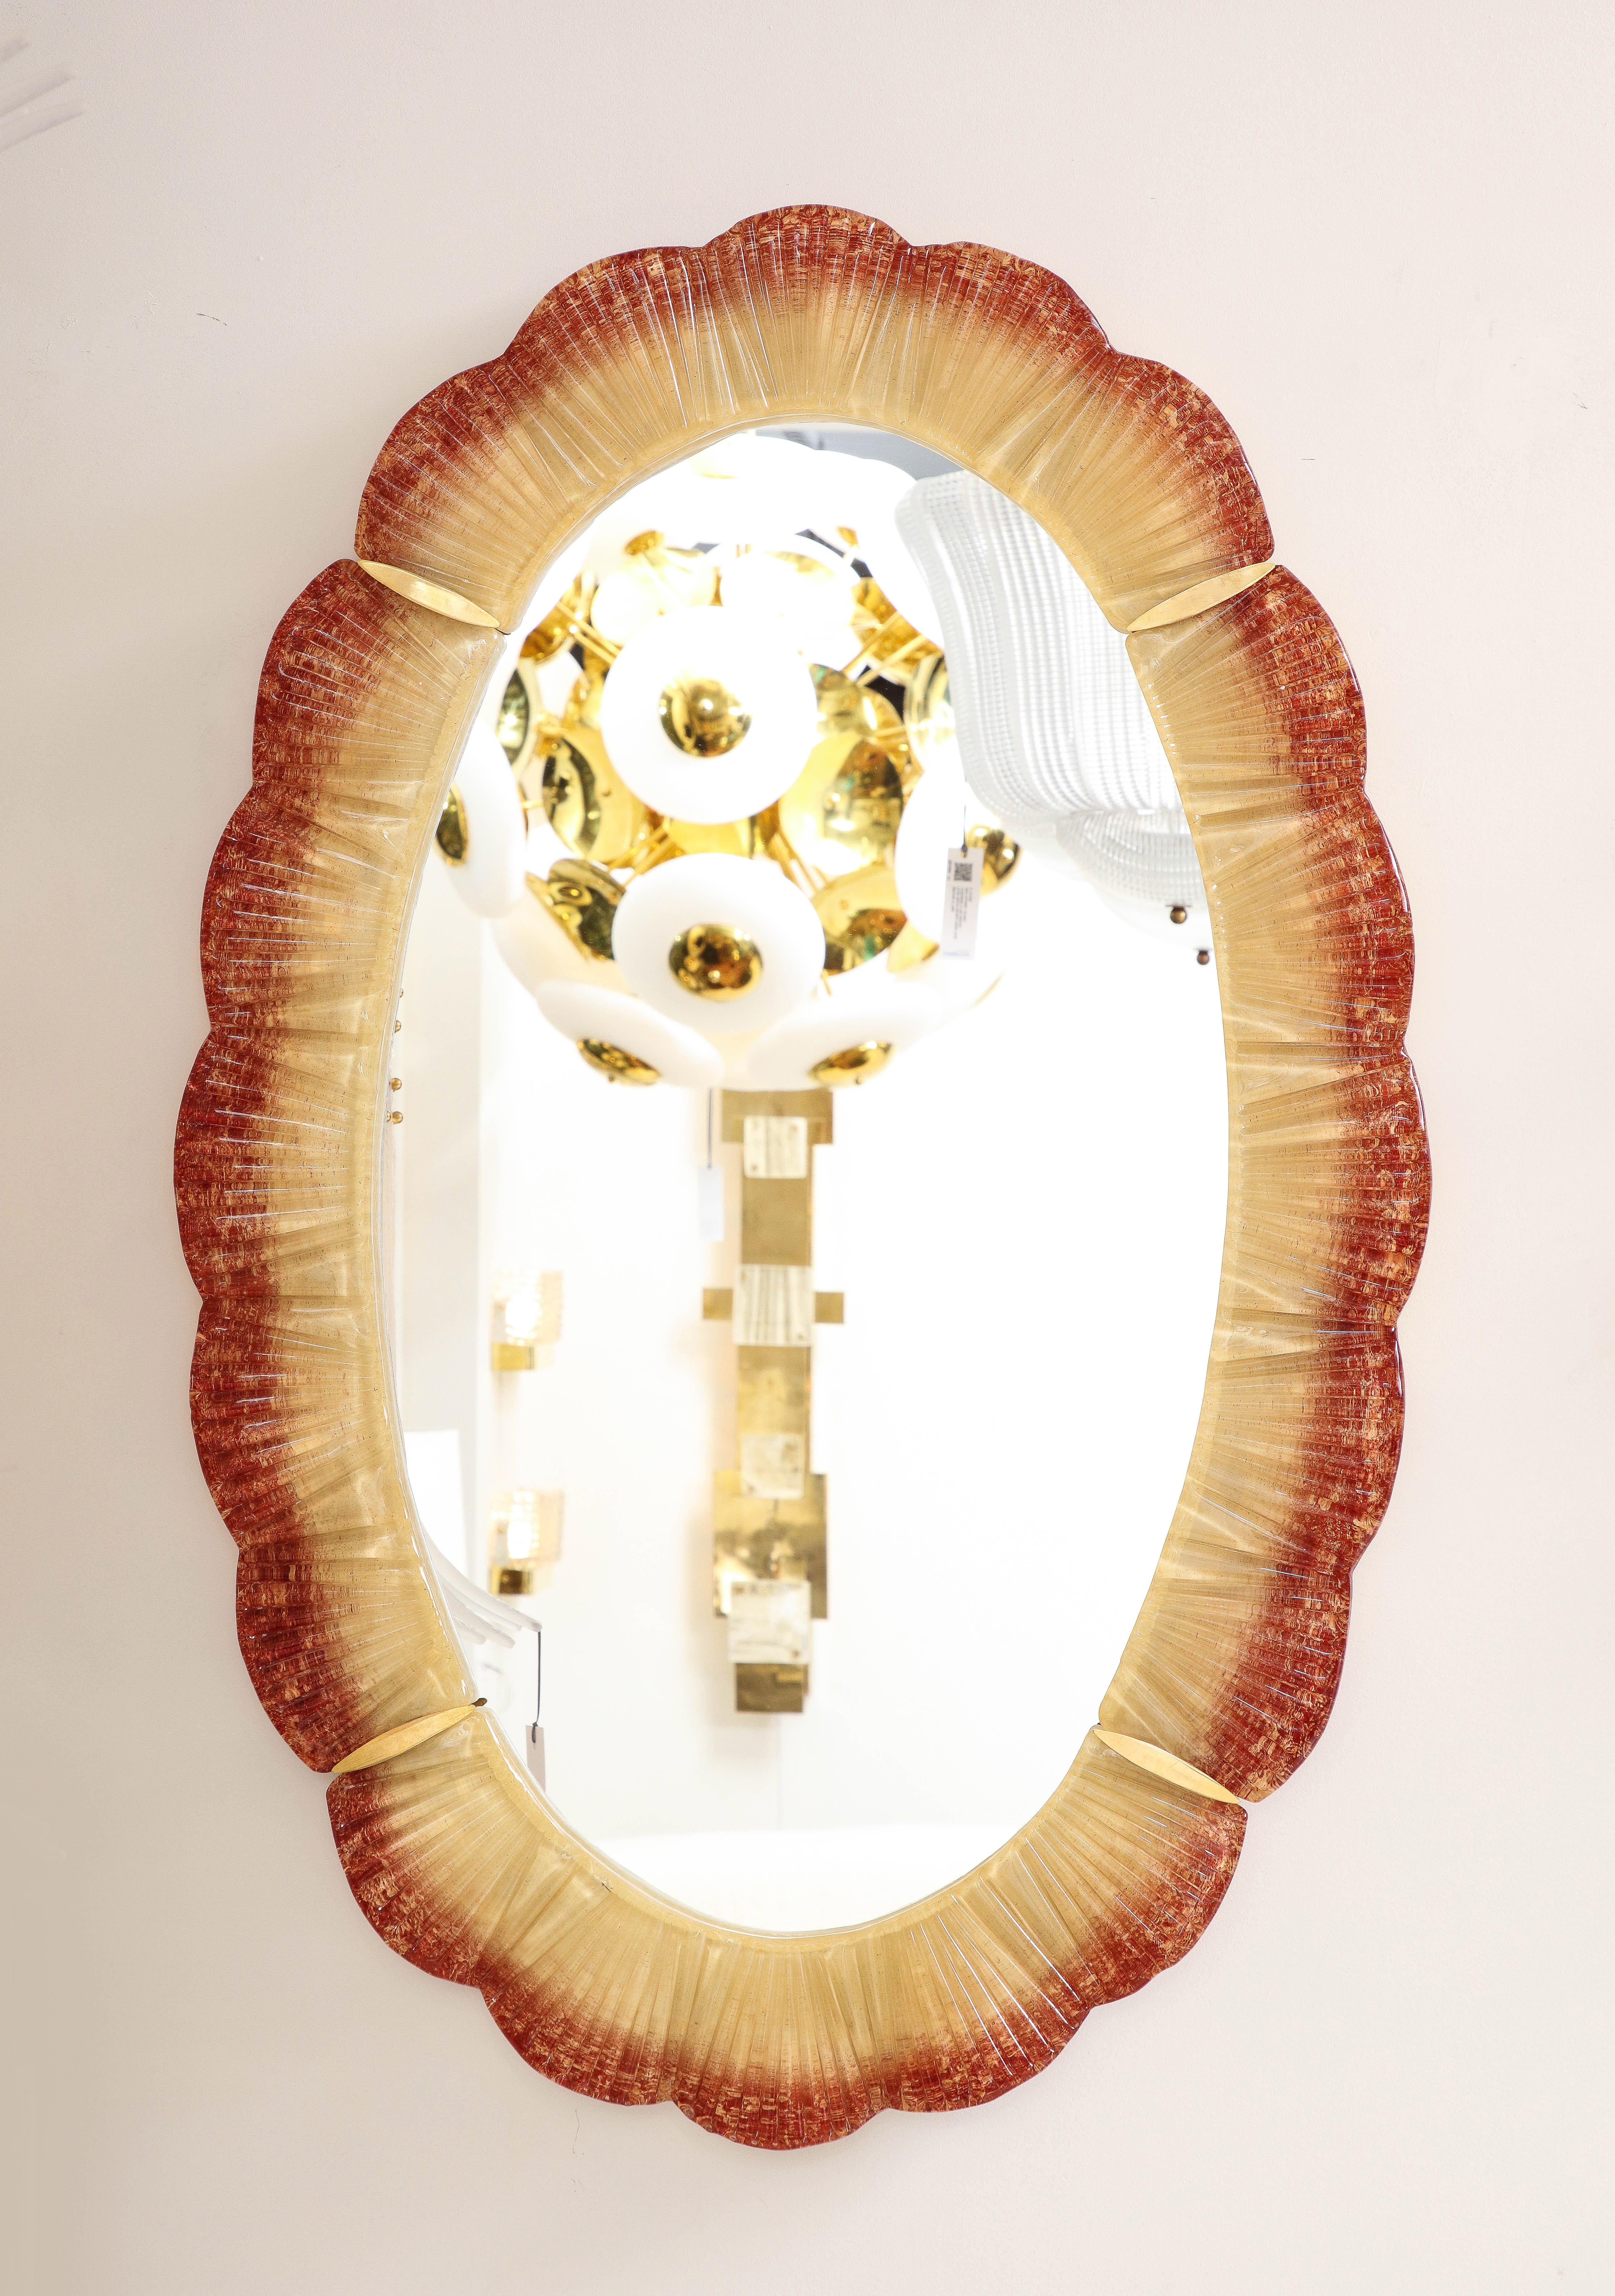 Pair of Oval Scalloped Murano glass and brass mirrors in an orange-red amber and gold color. Individually hand-casted sections of Murano glass with a scalloped edge in a dramatic ombre tone of orange-red to gold amber are united to form an oval